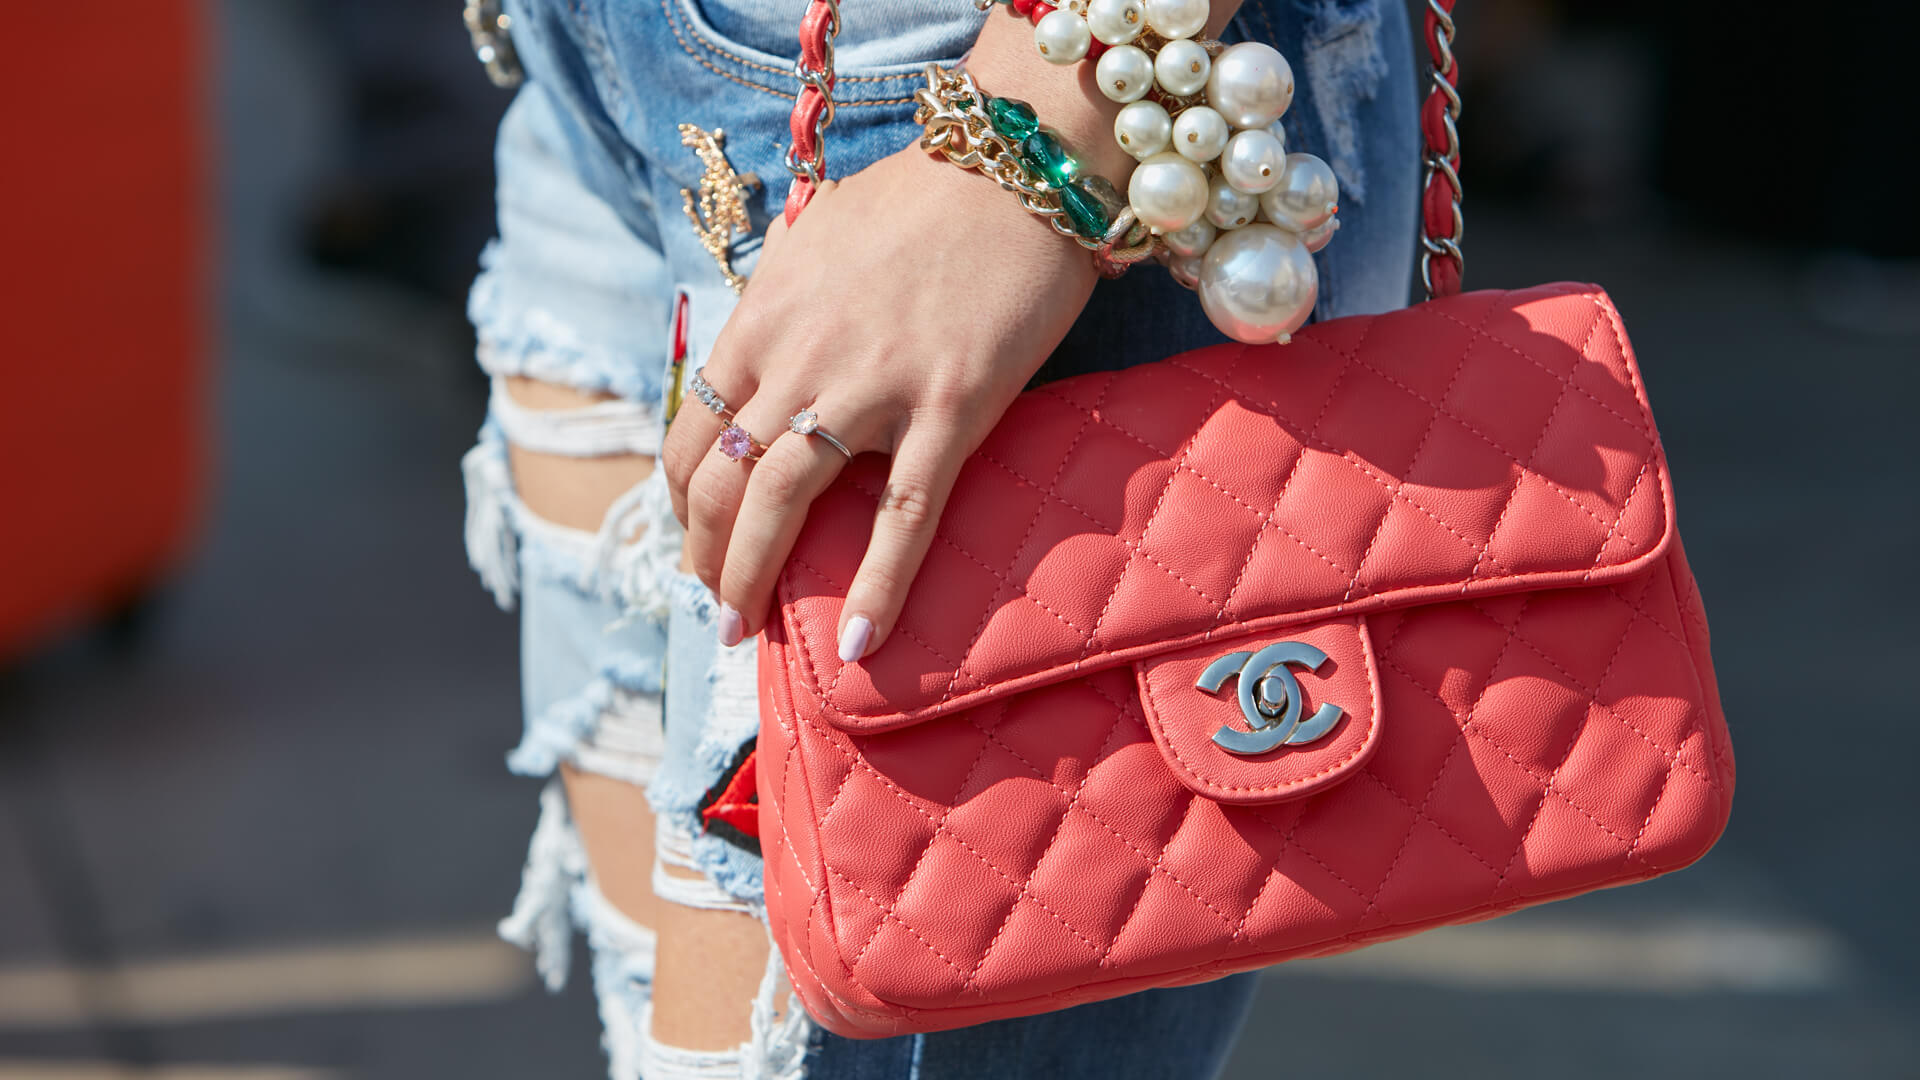 Is the Chanel Price Increase Worth It?